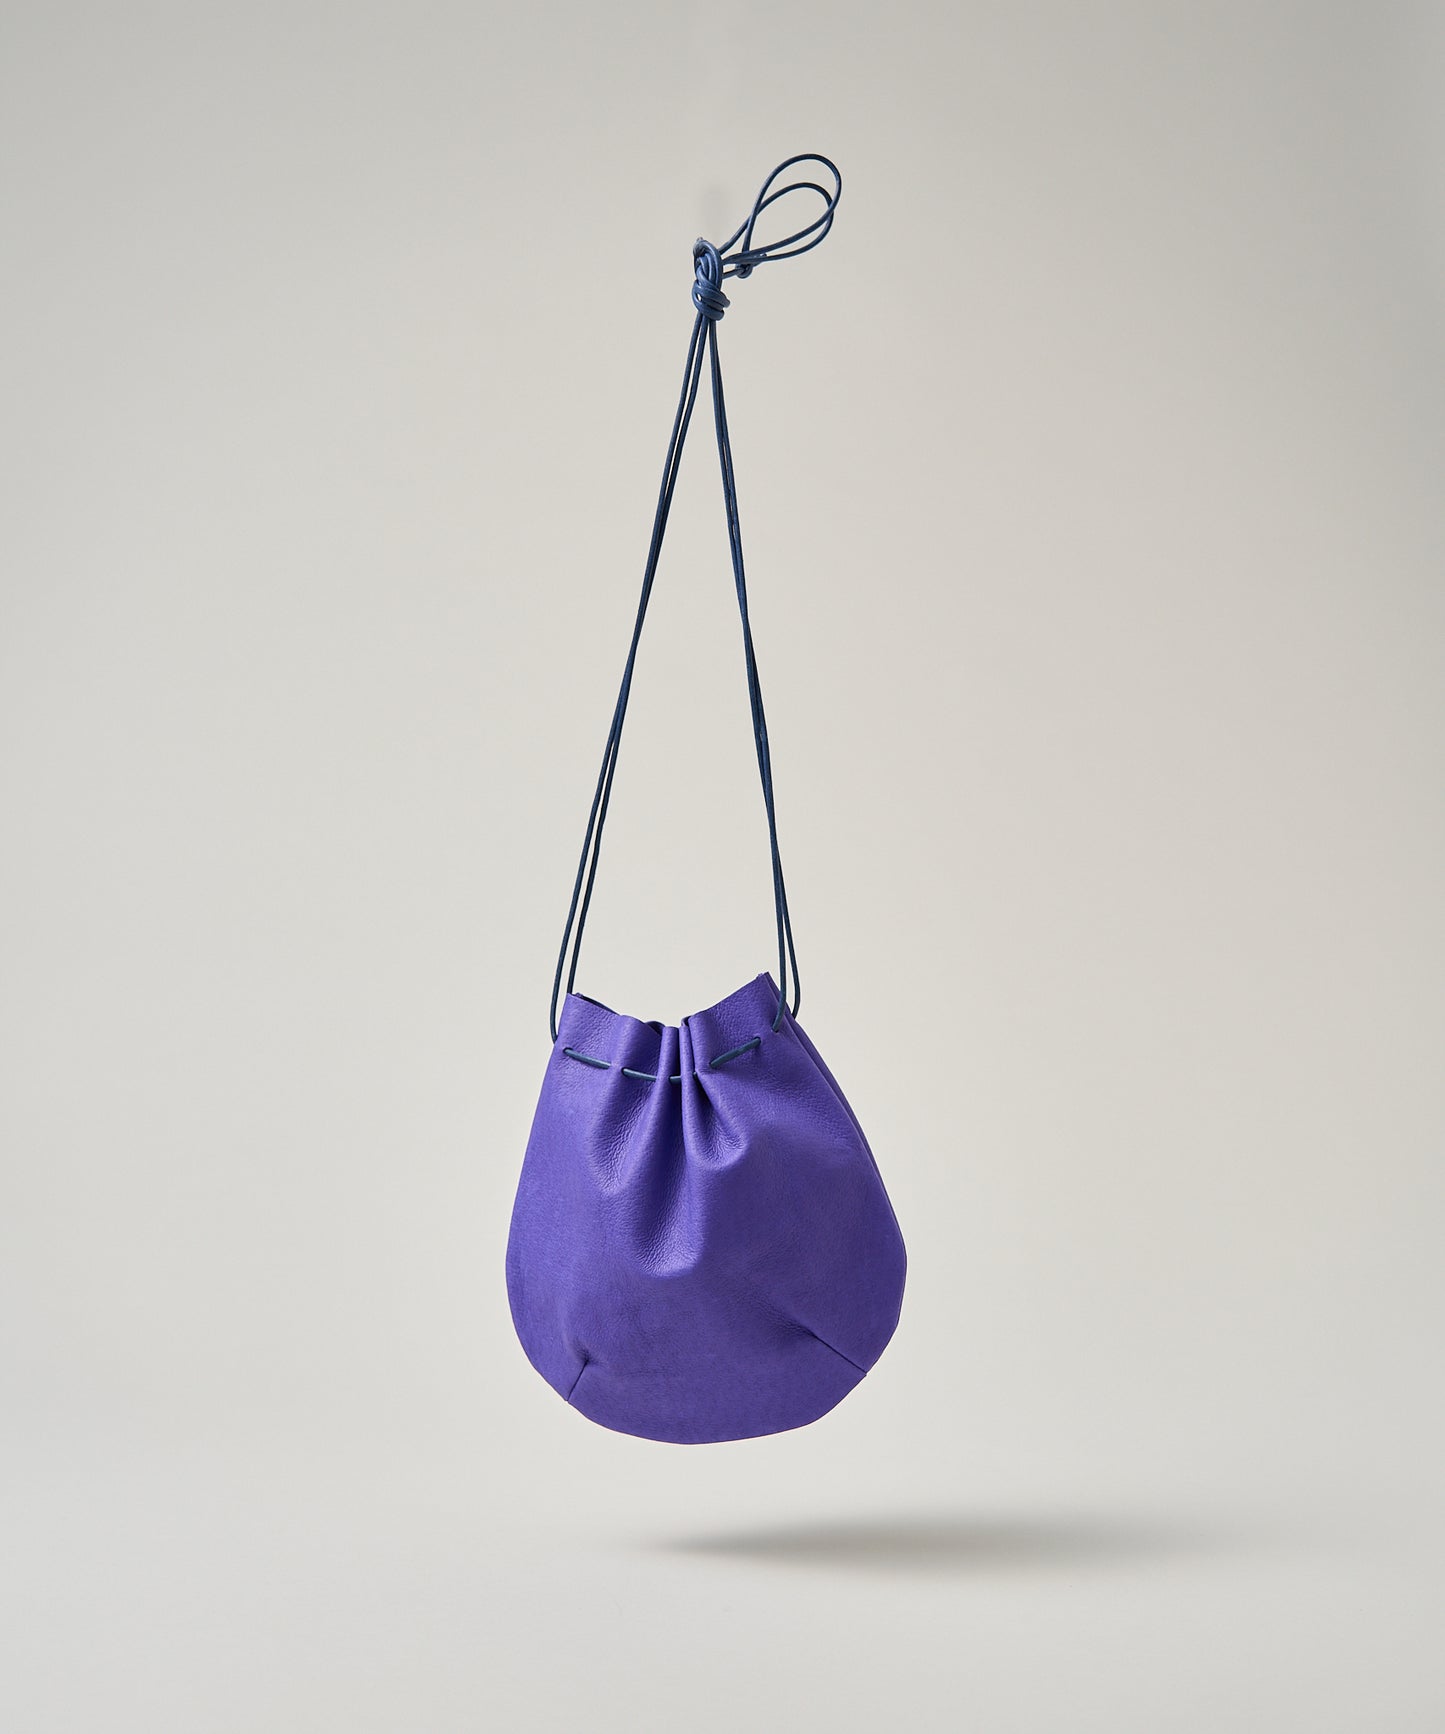 《SALE 20%》Balloon pouch / pigskin "HALLIE"（limited edition color）